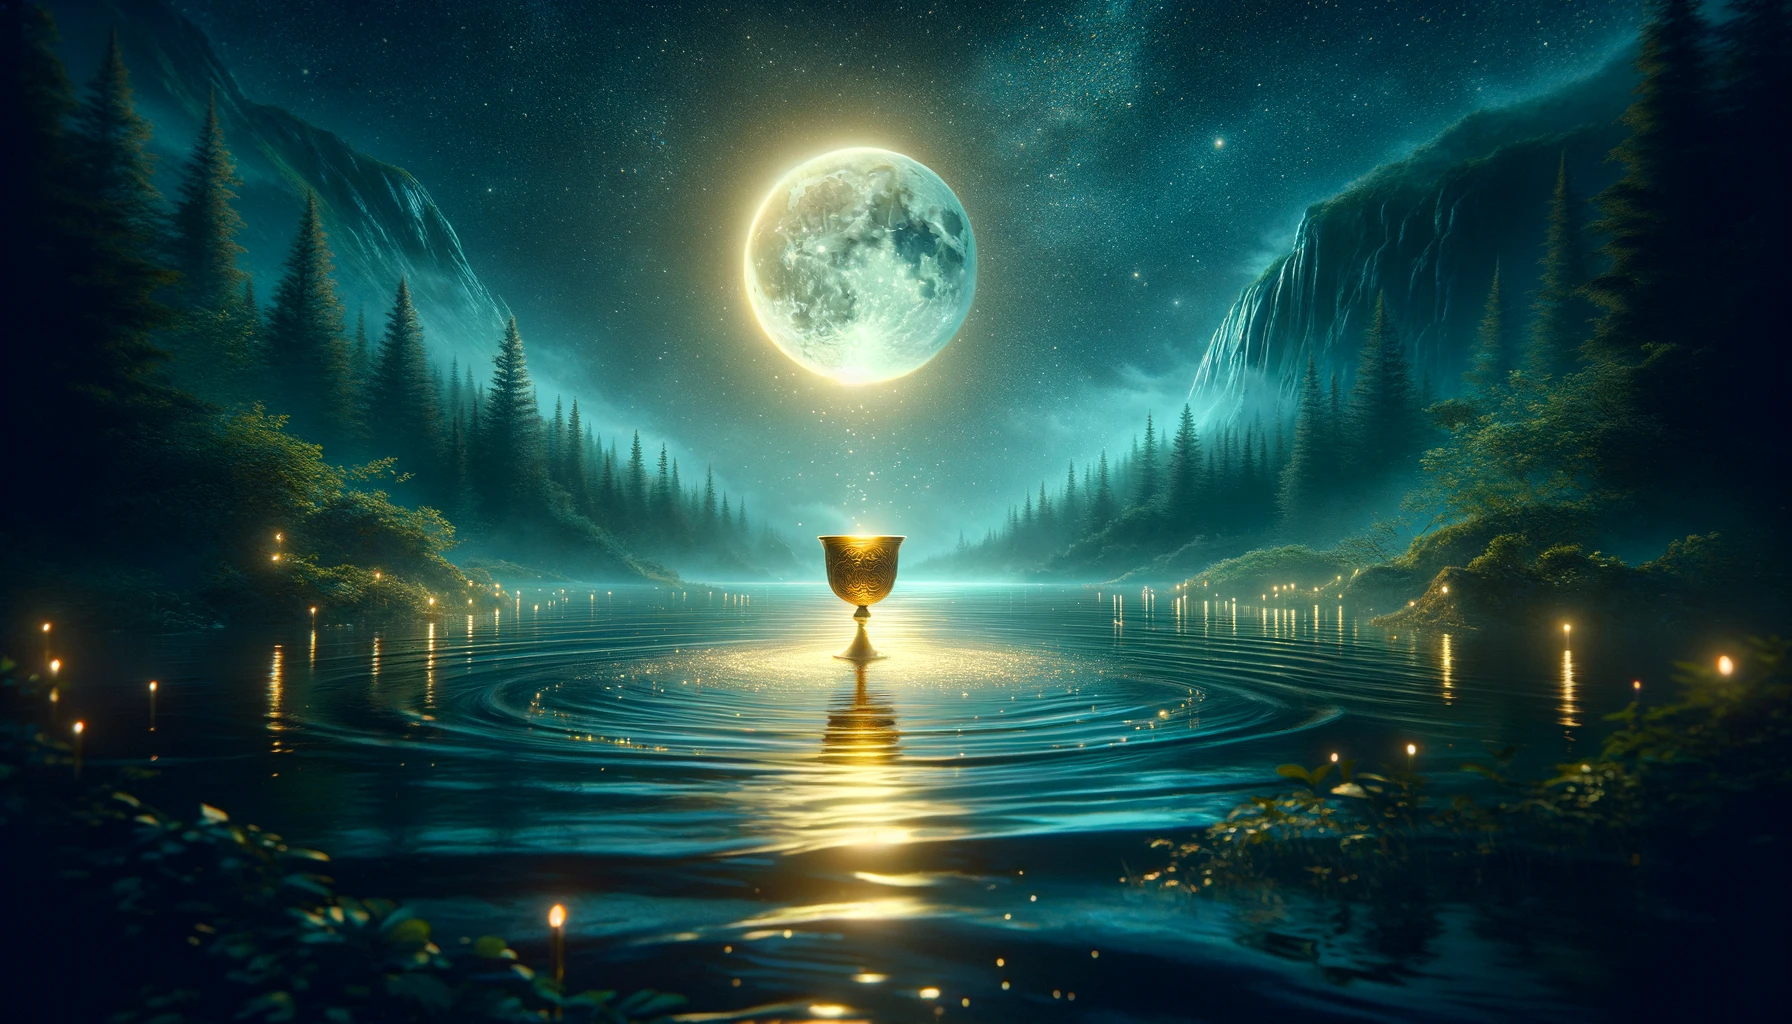 Create a 169 image depicting a serene moonlit lake surrounded by lush greenery capturing the ethereal and emotional essence of the Cups suit In the center of the scene a golden chalice